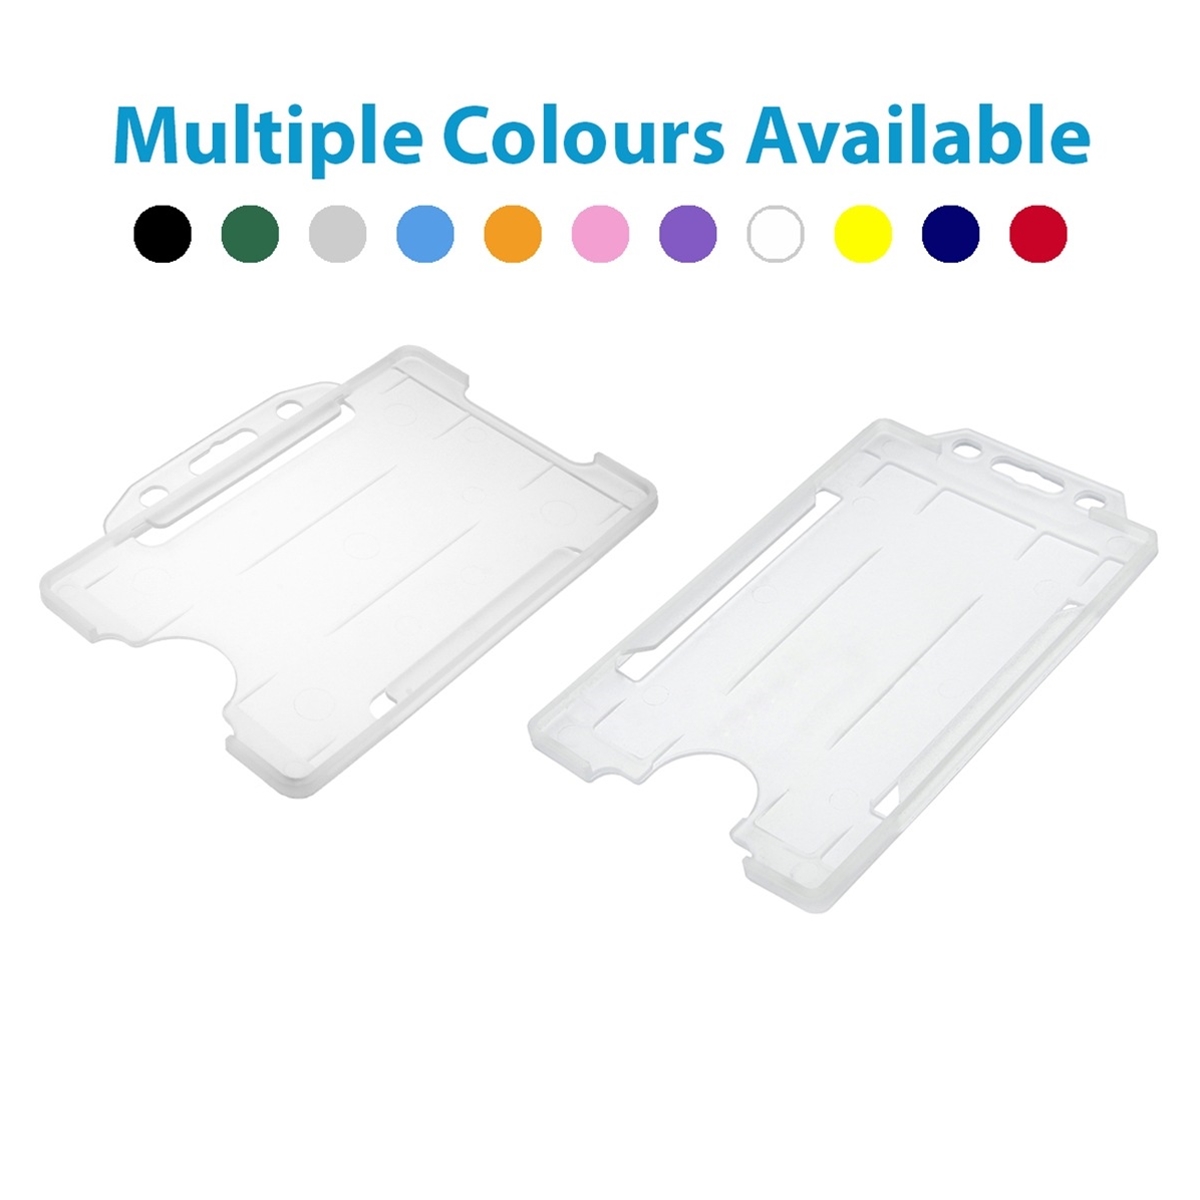 clear single sided open faced id card holders in both landscape and portrait showing multiple colours available